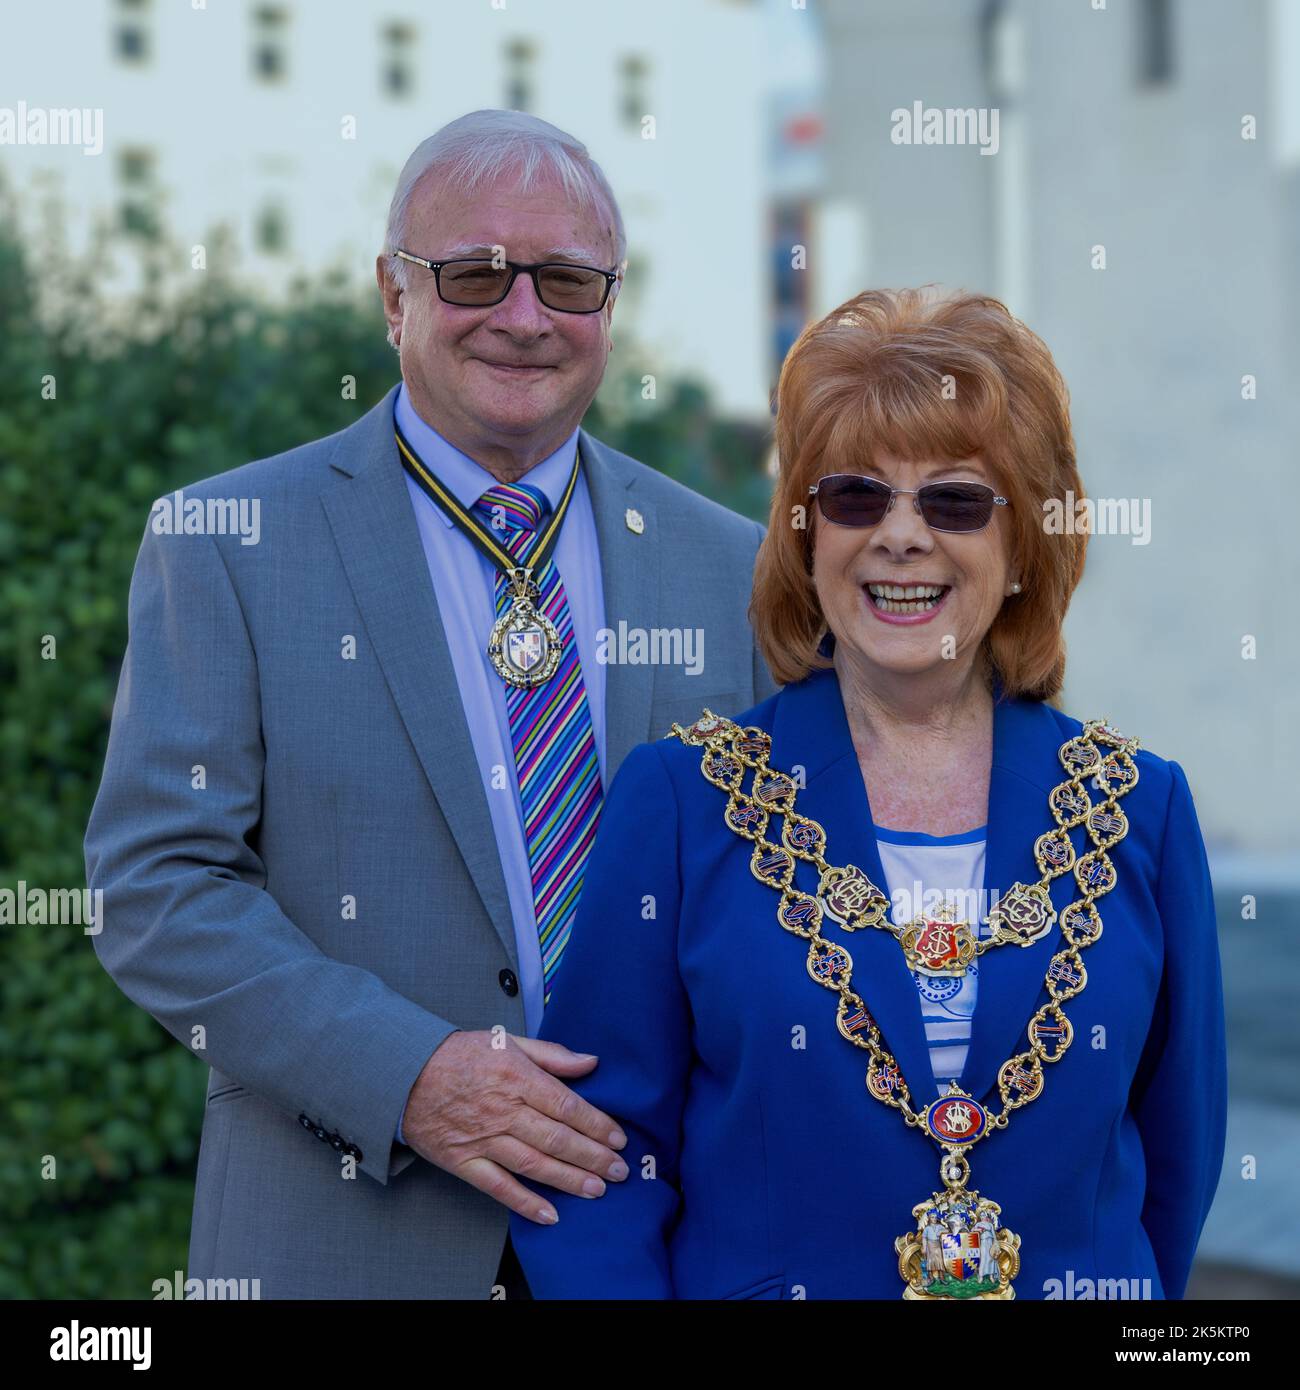 Portrait of The Lord Mayor of Birmingham, Cllr Maureen Cornish, and the Lord Mayor's Consort, her husband Malcolm. Stock Photo